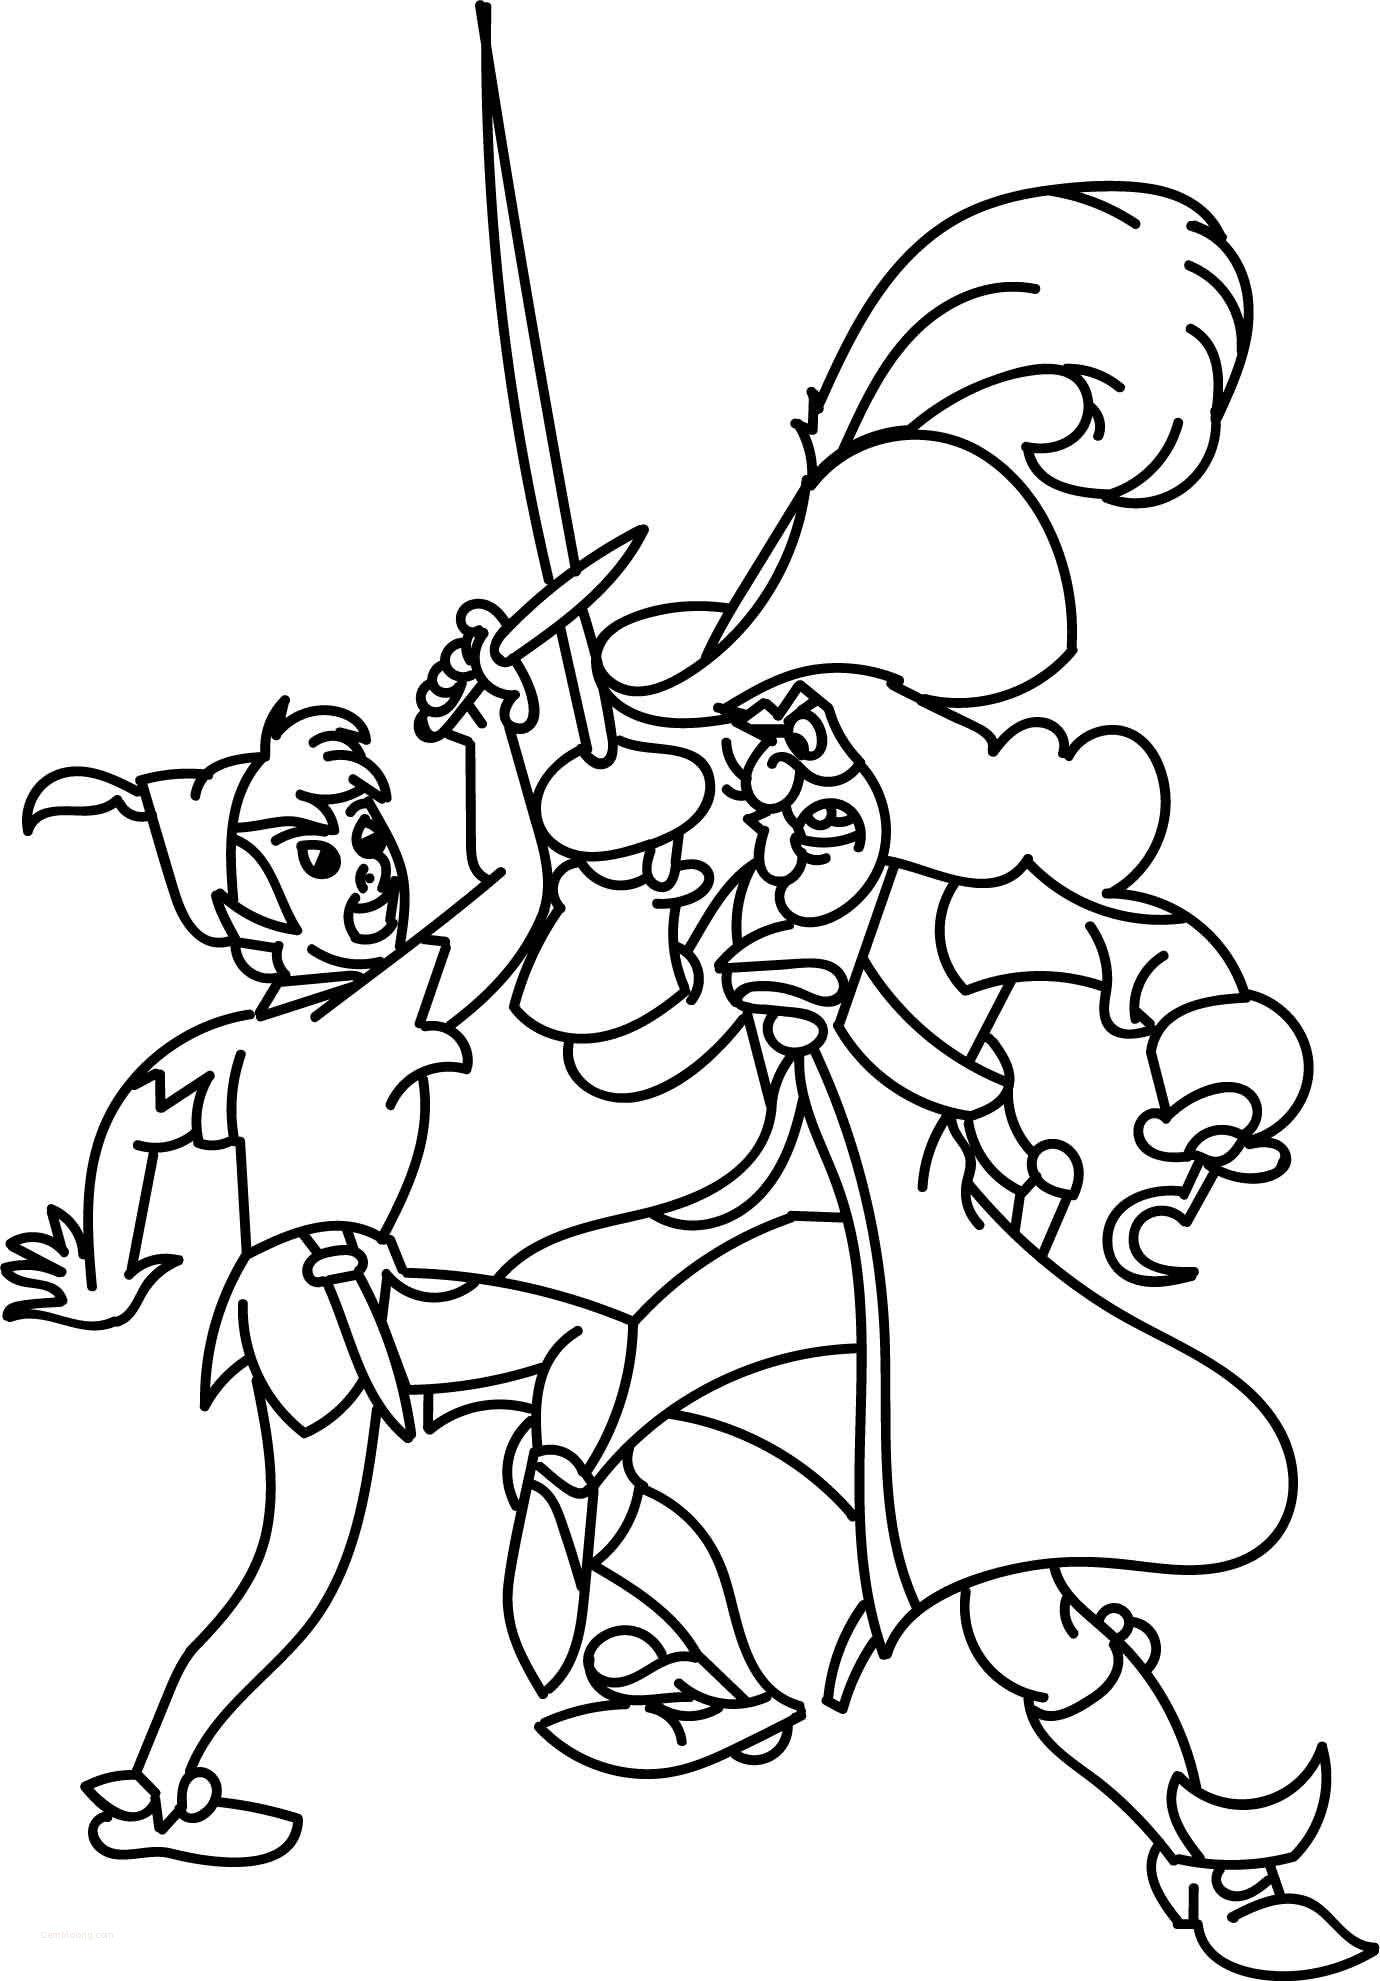 Coloring Page : Peter Pan Coloring Page Luxury Awesome Peter Pan